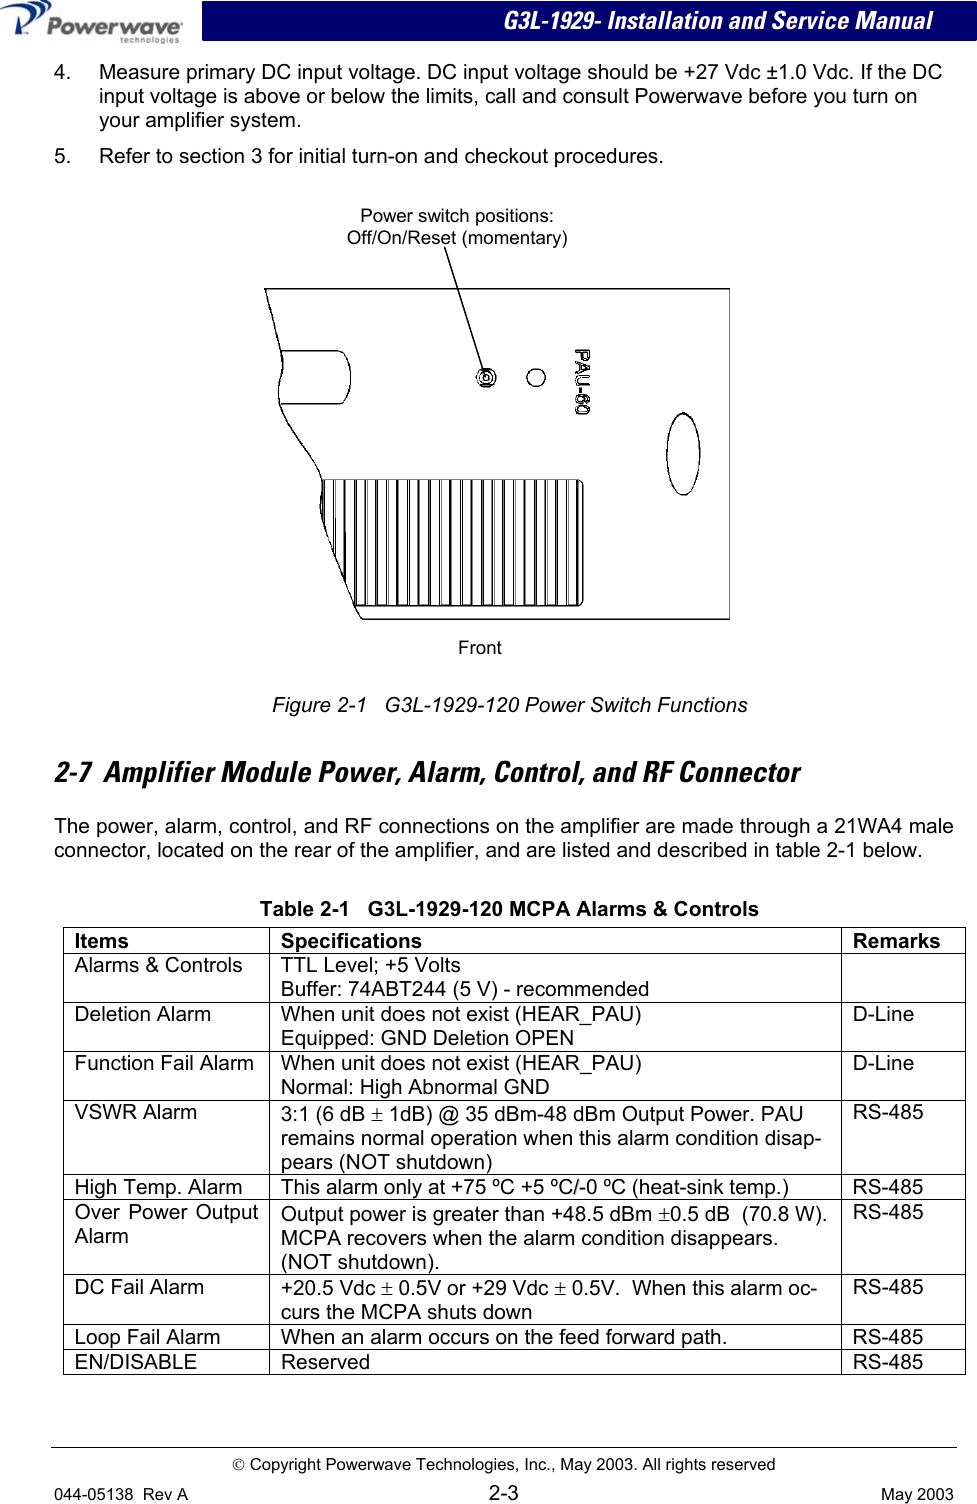 G3L-1929- Installation and Service Manual 4.  Measure primary DC input voltage. DC input voltage should be +27 Vdc ±1.0 Vdc. If the DC input voltage is above or below the limits, call and consult Powerwave before you turn on your amplifier system. 5.  Refer to section 3 for initial turn-on and checkout procedures.    Power switch positions: Off/On/Reset (momentary)     Front Figure 2-1   G3L-1929-120 Power Switch Functions 2-7  Amplifier Module Power, Alarm, Control, and RF Connector The power, alarm, control, and RF connections on the amplifier are made through a 21WA4 male connector, located on the rear of the amplifier, and are listed and described in table 2-1 below.   Table 2-1   G3L-1929-120 MCPA Alarms &amp; Controls Items Specifications  Remarks Alarms &amp; Controls  TTL Level; +5 Volts Buffer: 74ABT244 (5 V) - recommended  Deletion Alarm  When unit does not exist (HEAR_PAU) Equipped: GND Deletion OPEN D-Line Function Fail Alarm  When unit does not exist (HEAR_PAU) Normal: High Abnormal GND D-Line VSWR Alarm  3:1 (6 dB ± 1dB) @ 35 dBm-48 dBm Output Power. PAU remains normal operation when this alarm condition disap-pears (NOT shutdown) RS-485 High Temp. Alarm  This alarm only at +75 ºC +5  ºC//-0  ºC (heat-sink temp.)  RS-485 Over Power Output Alarm Output power is greater than +48.5 dBm ±0.5 dB  (70.8 W). MCPA recovers when the alarm condition disappears. (NOT shutdown). RS-485 DC Fail Alarm  +20.5 Vdc ± 0.5V or +29 Vdc ± 0.5V.  When this alarm oc-curs the MCPA shuts down RS-485 Loop Fail Alarm  When an alarm occurs on the feed forward path.  RS-485 EN/DISABLE Reserved  RS-485    Copyright Powerwave Technologies, Inc., May 2003. All rights reserved 044-05138  Rev A 2-3  May 2003 